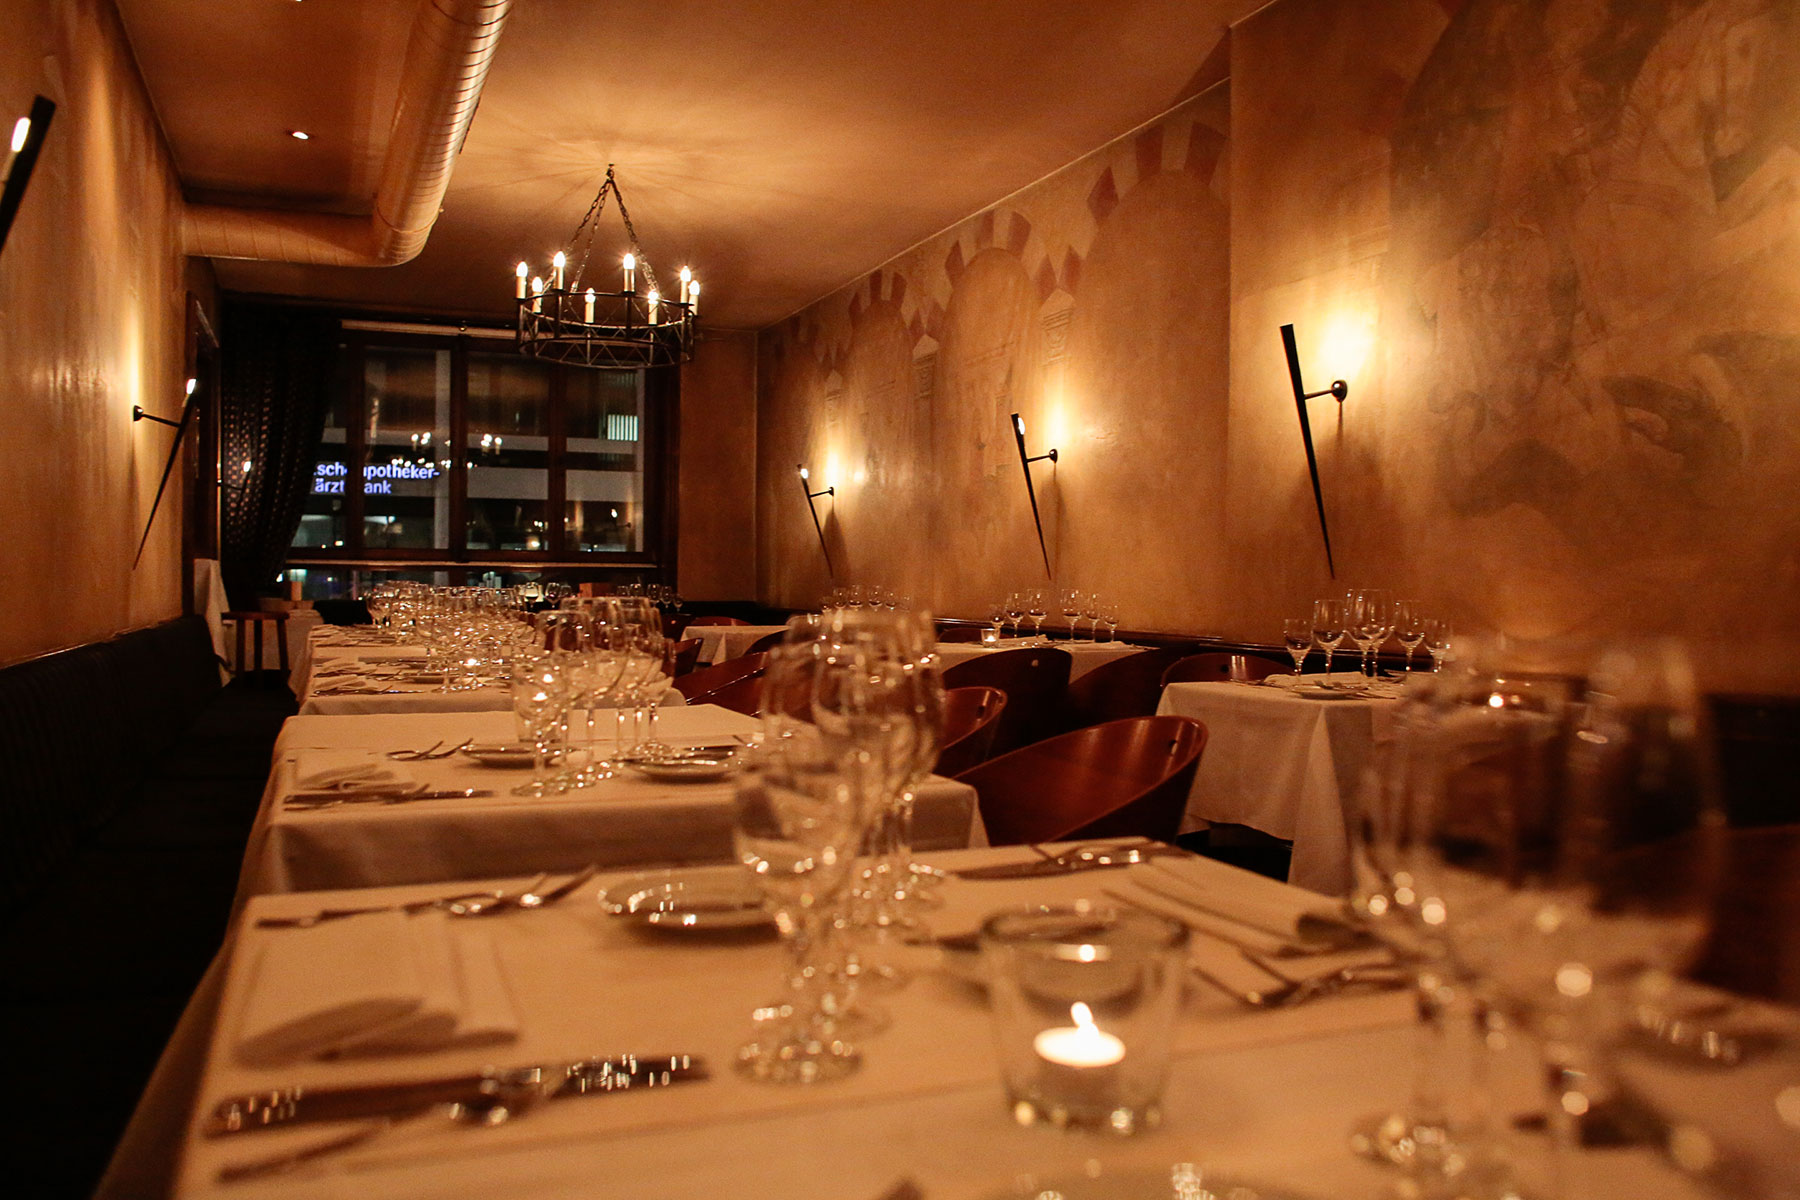 Restaurant Enrico Leone in Hanover with dimmed lights and set tables